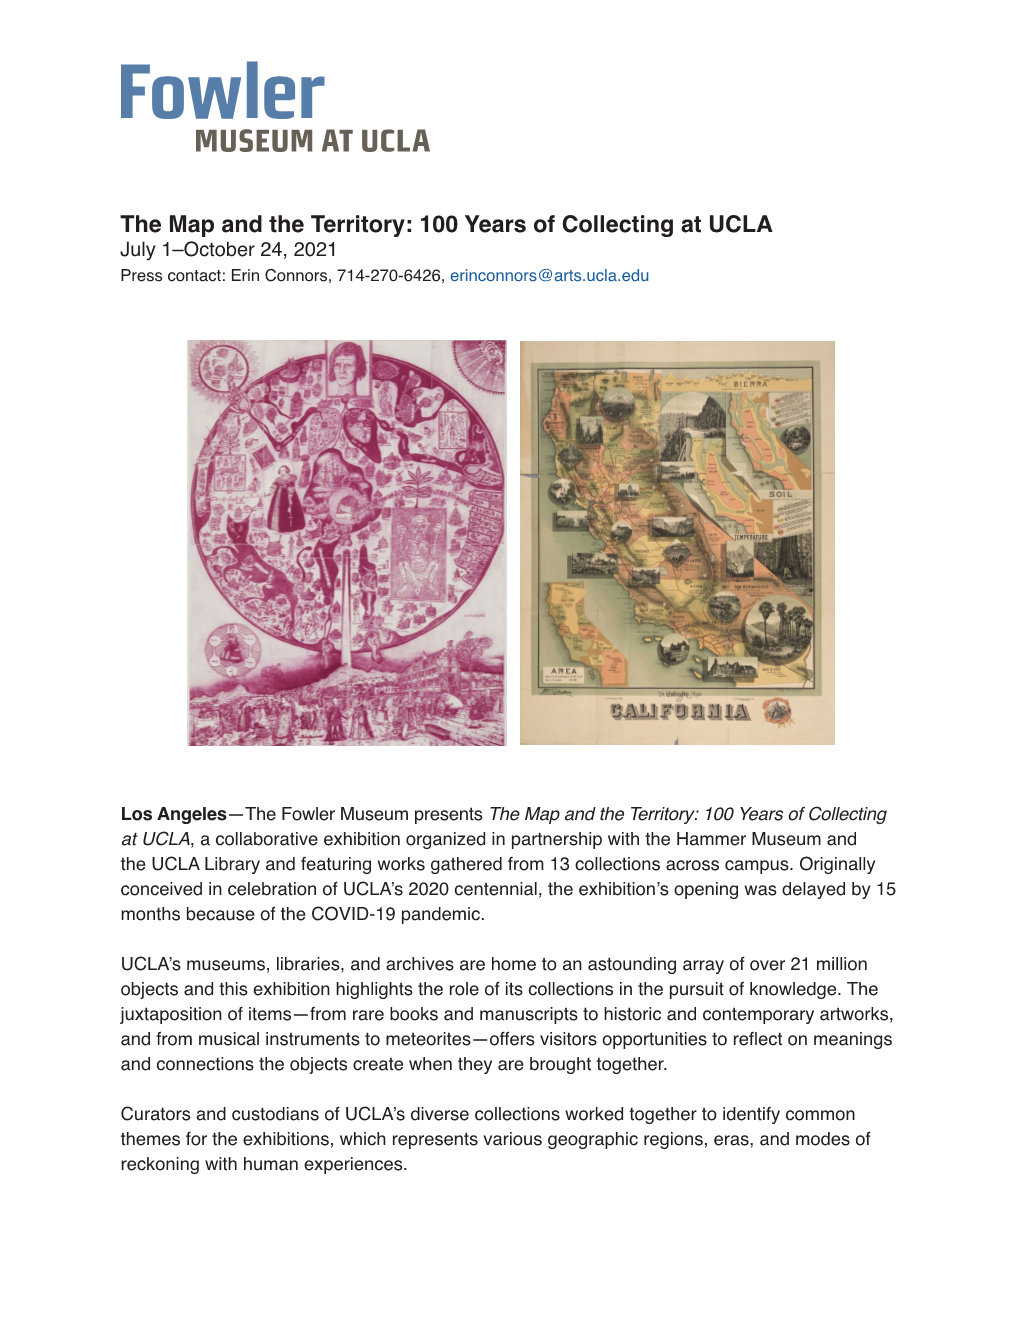 The Map and the Territory: 100 Years of Collecting at UCLA July 1–October 24, 2021 Press Contact: Erin Connors, 714-270-6426, Erinconnors@Arts.Ucla.Edu